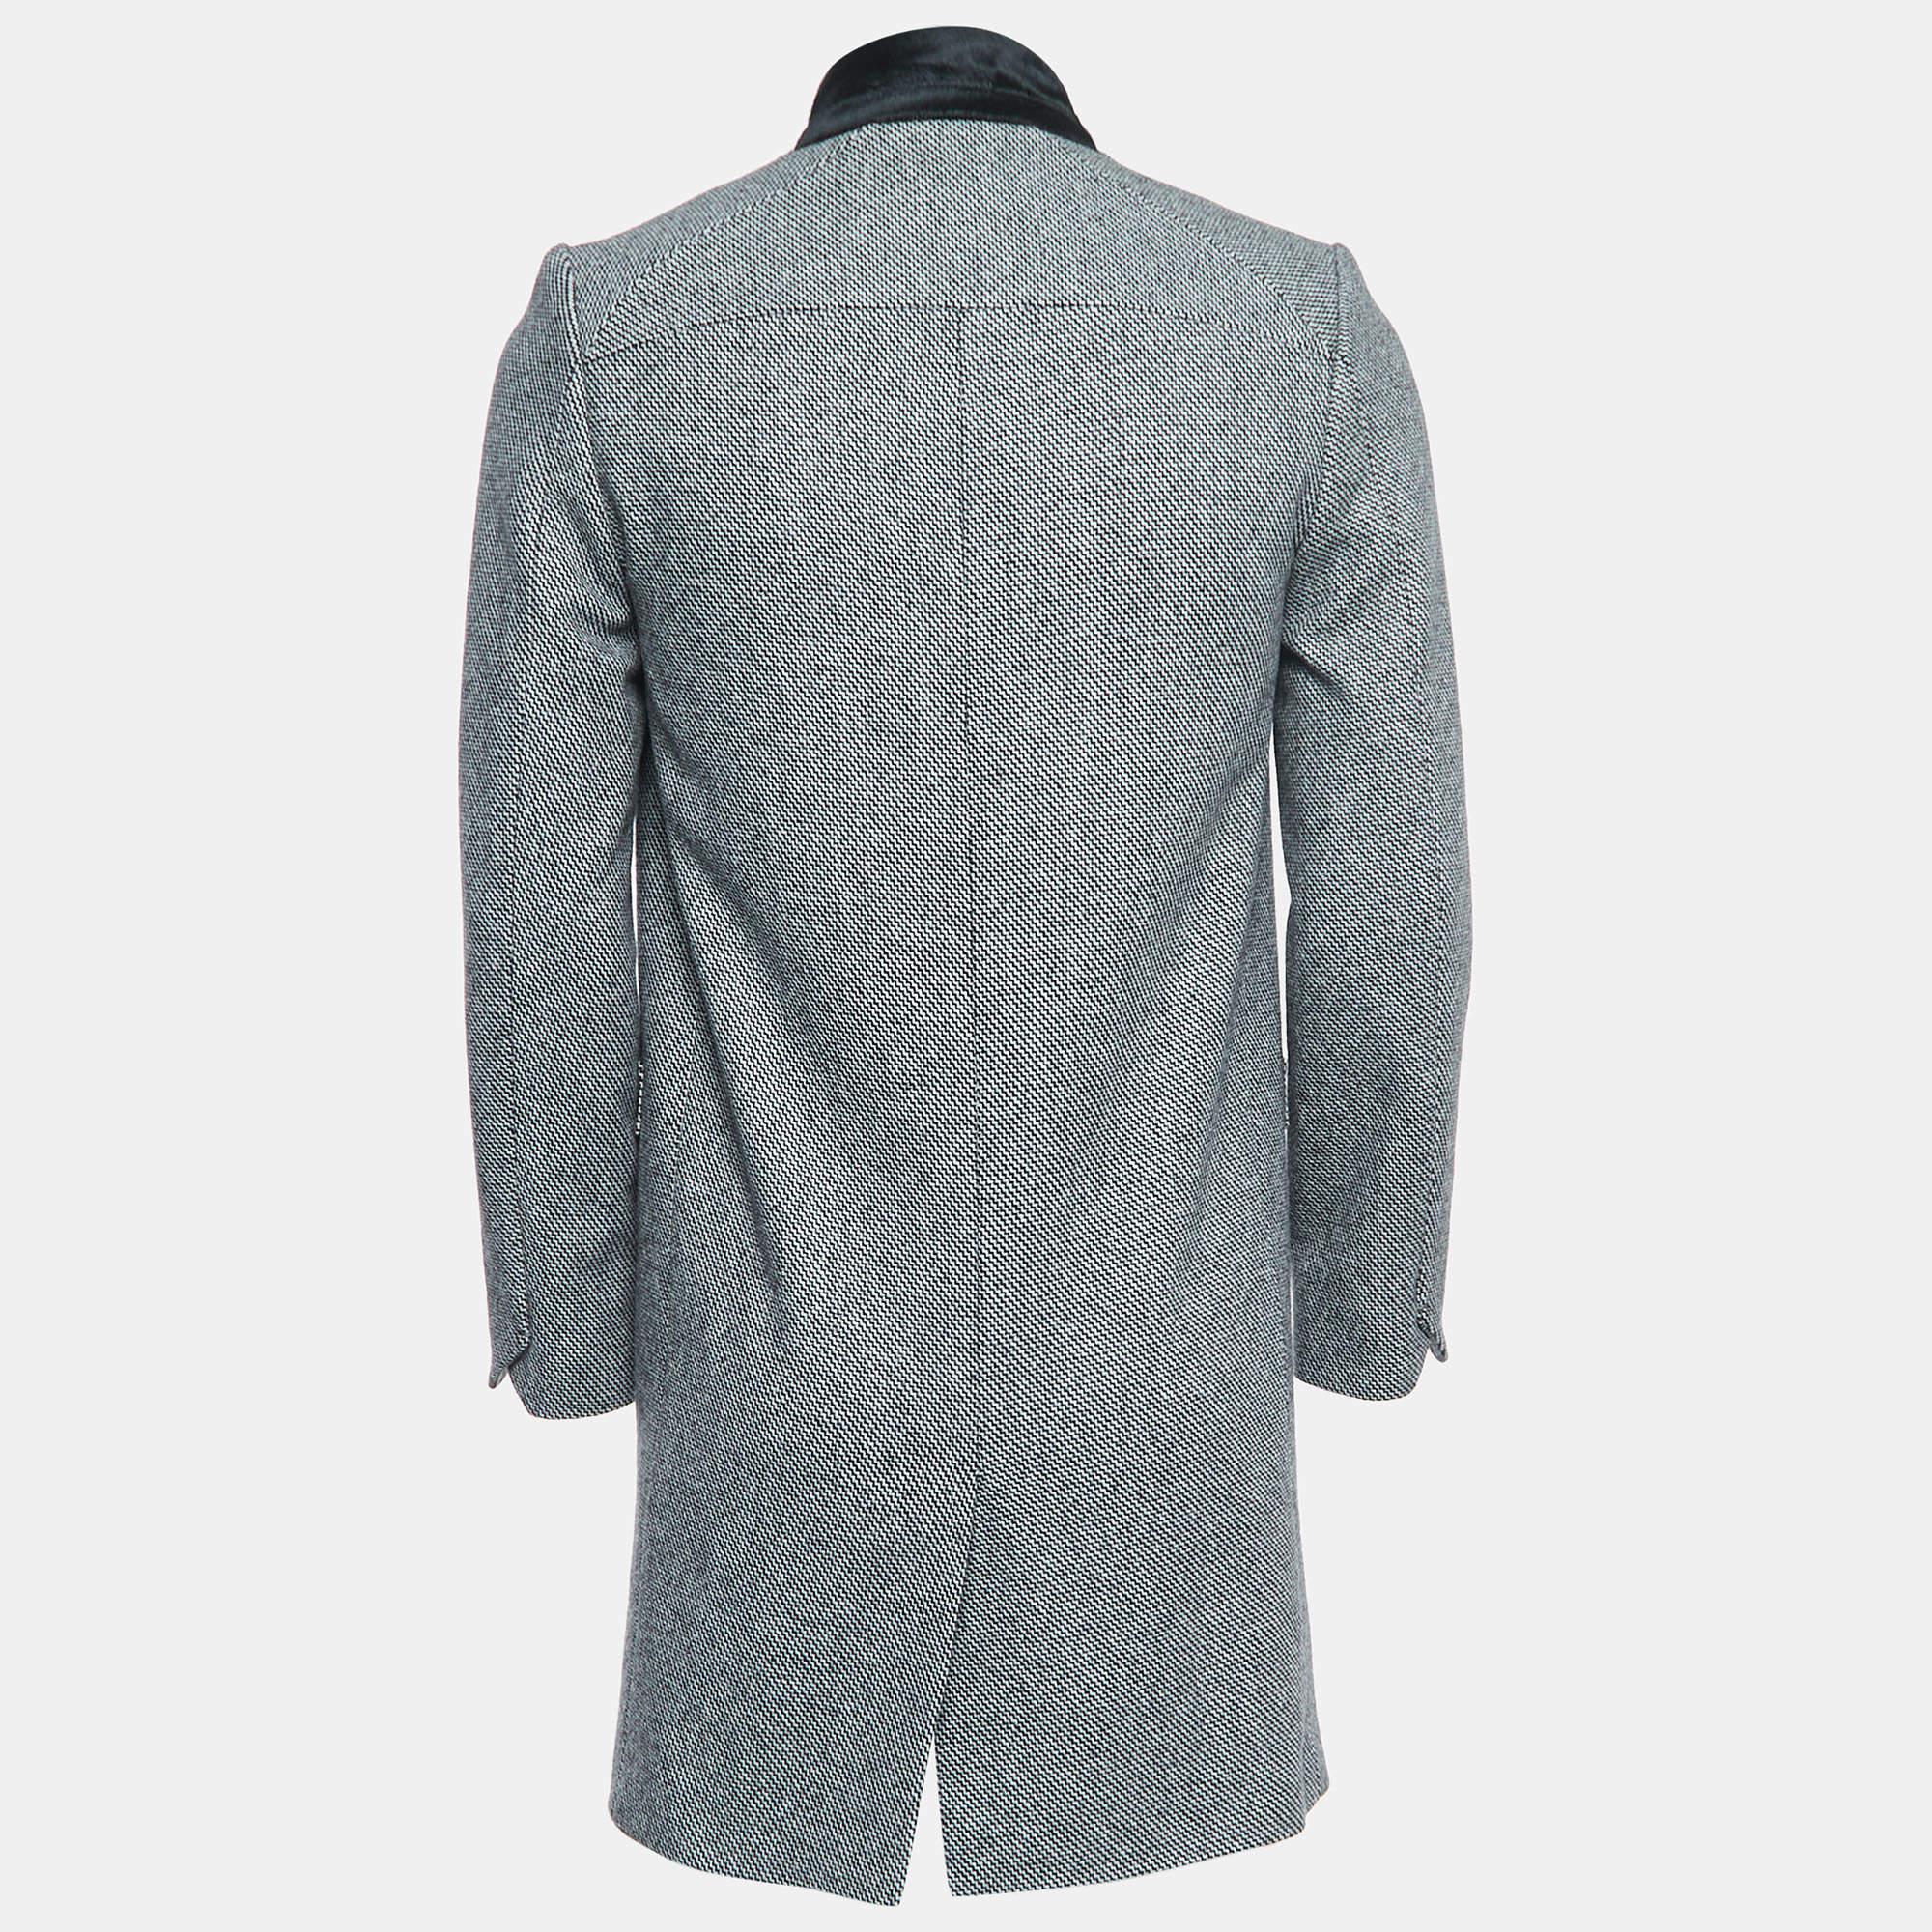 Coats like this one are an amazing accessory to polish your attire. Made from good fabrics and detailed with a noticeable design, this coat ensures your looks are always on point.

